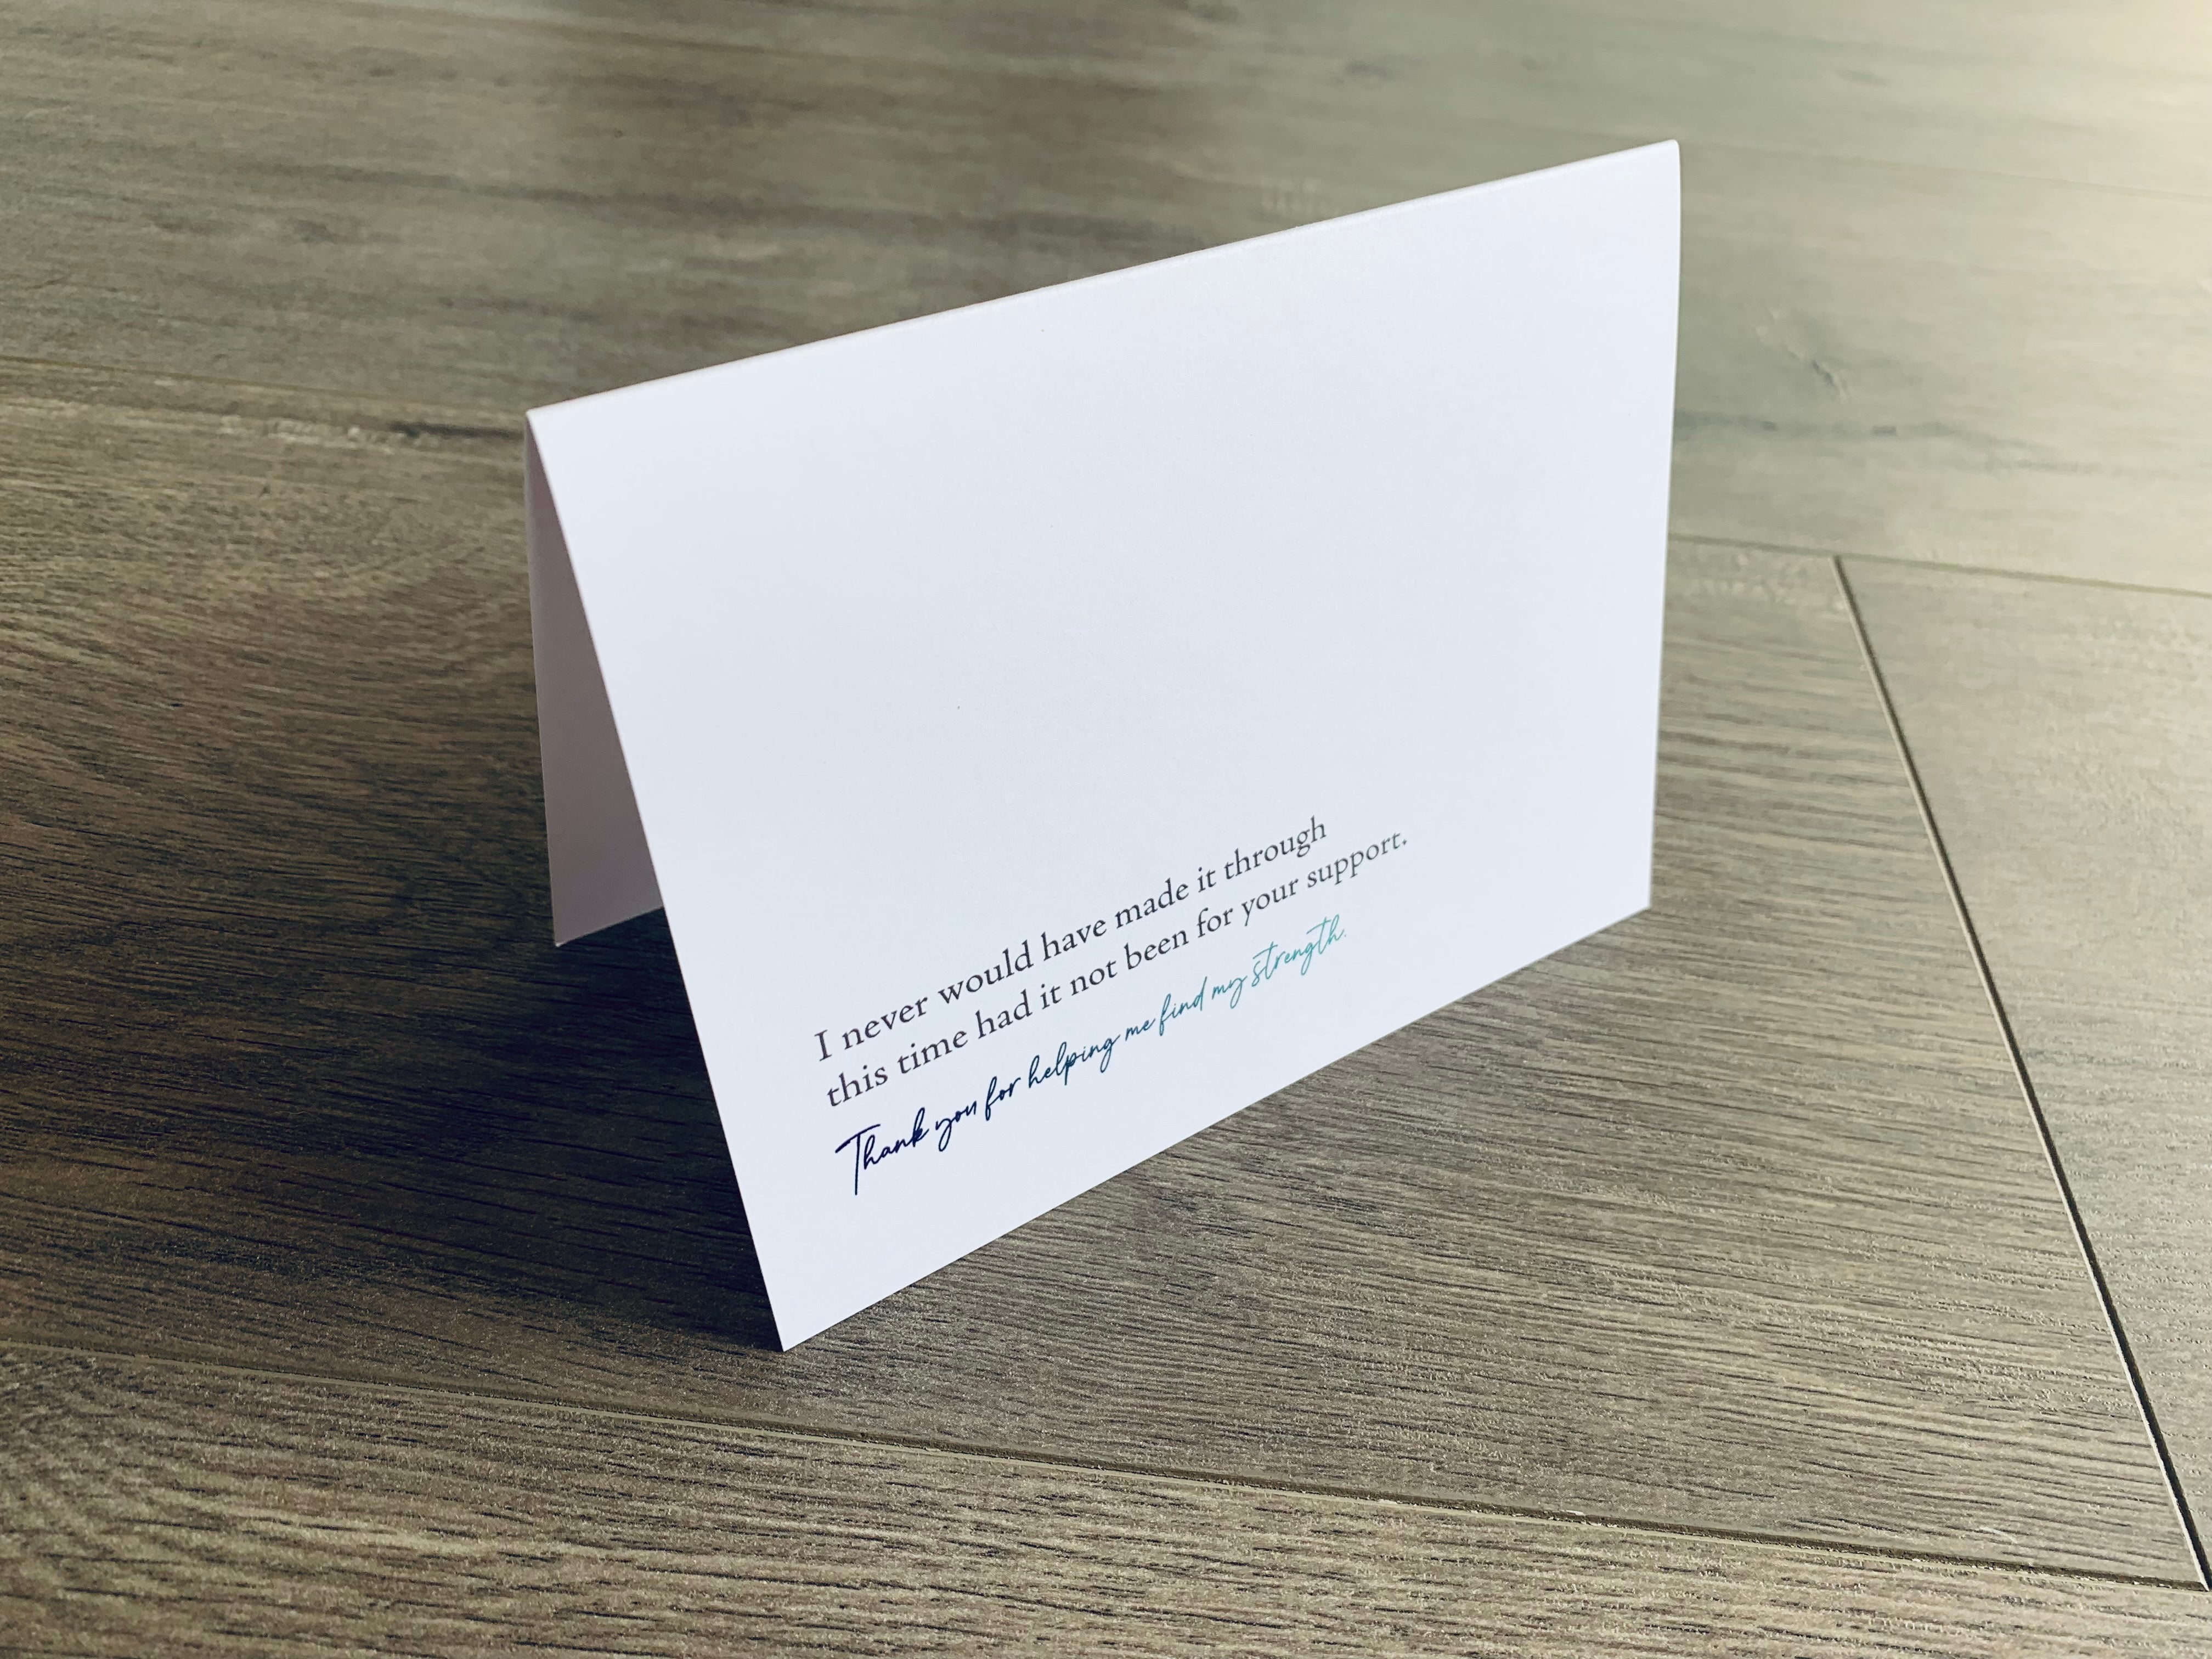 A folded white notecard is propped up on a wooden floor. The card reads, "I never would have made it through this time had it not been for your support. Thank you for helping me find my strength." Stationare's Surviving Hard Times collection.